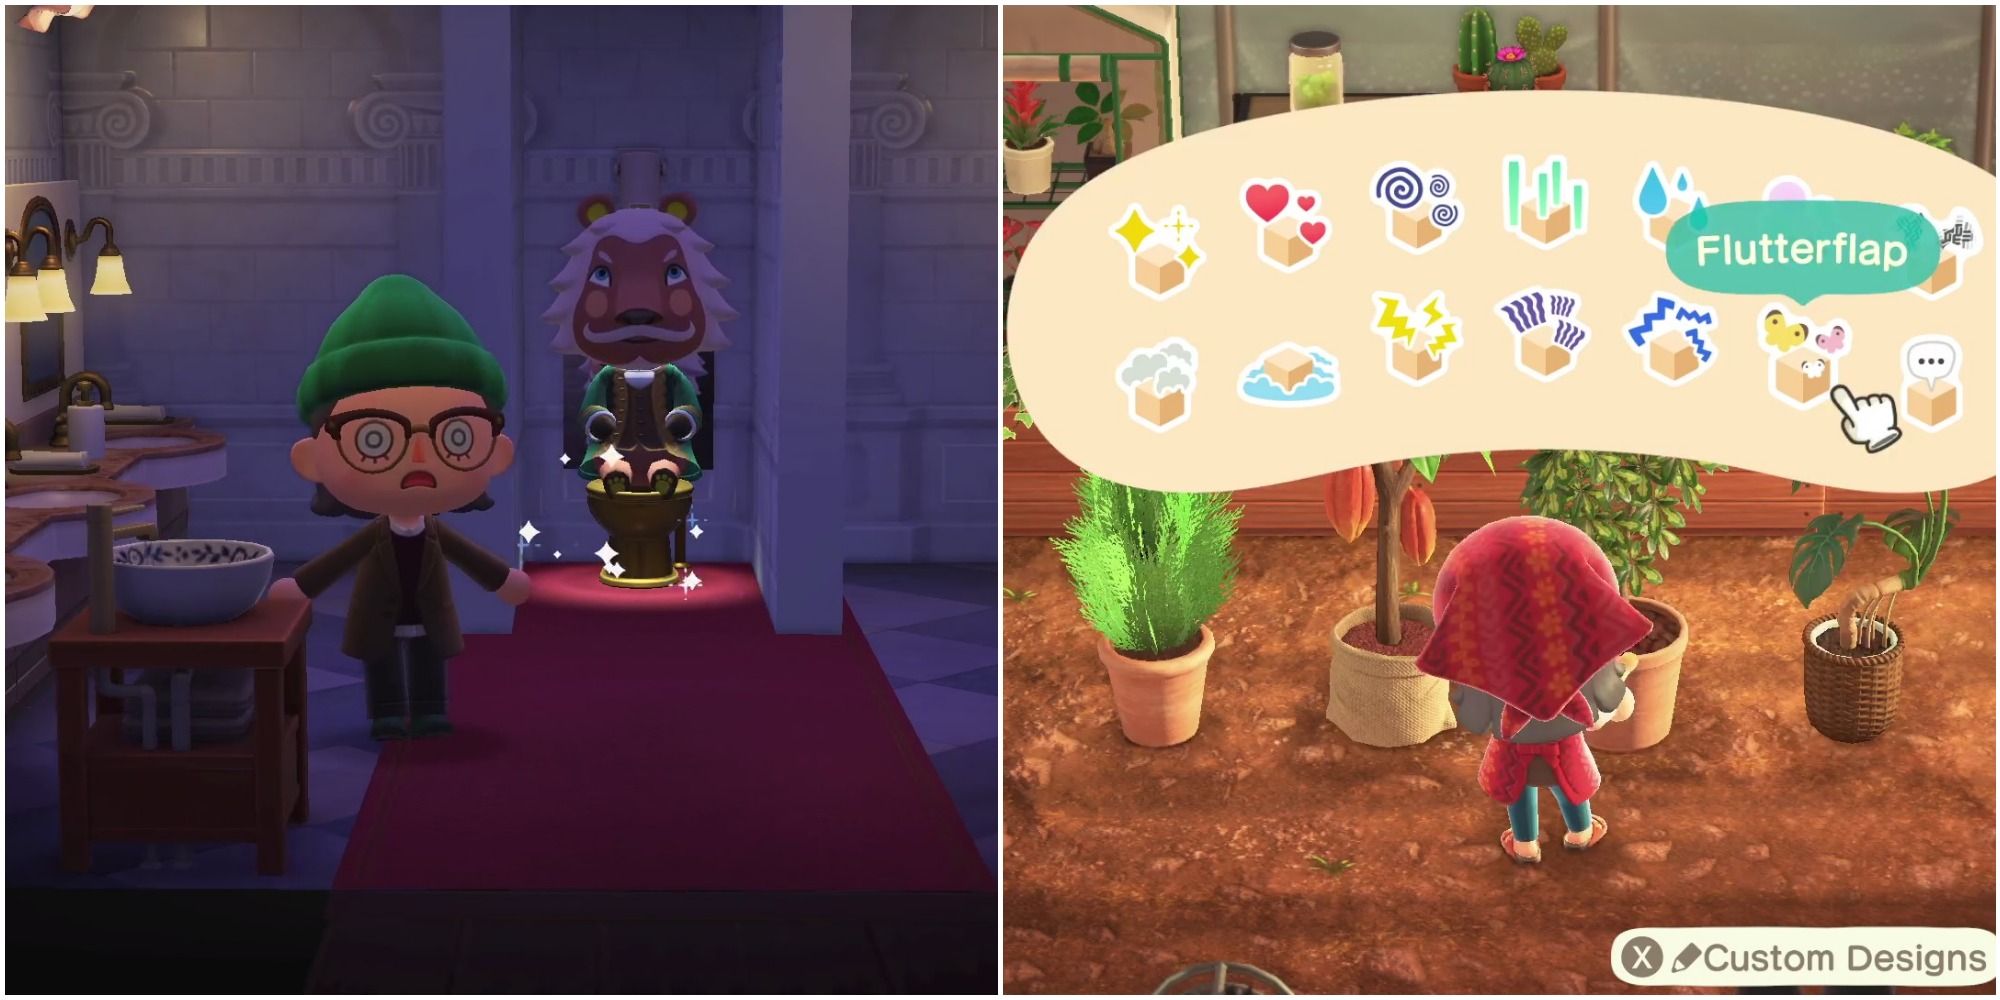 A split image from left to right: a player stands aghast in a restroom as a lion sits on a sparkly golden toliet, and a player stands before a row of plant with the "flutterflap" polishing option selected